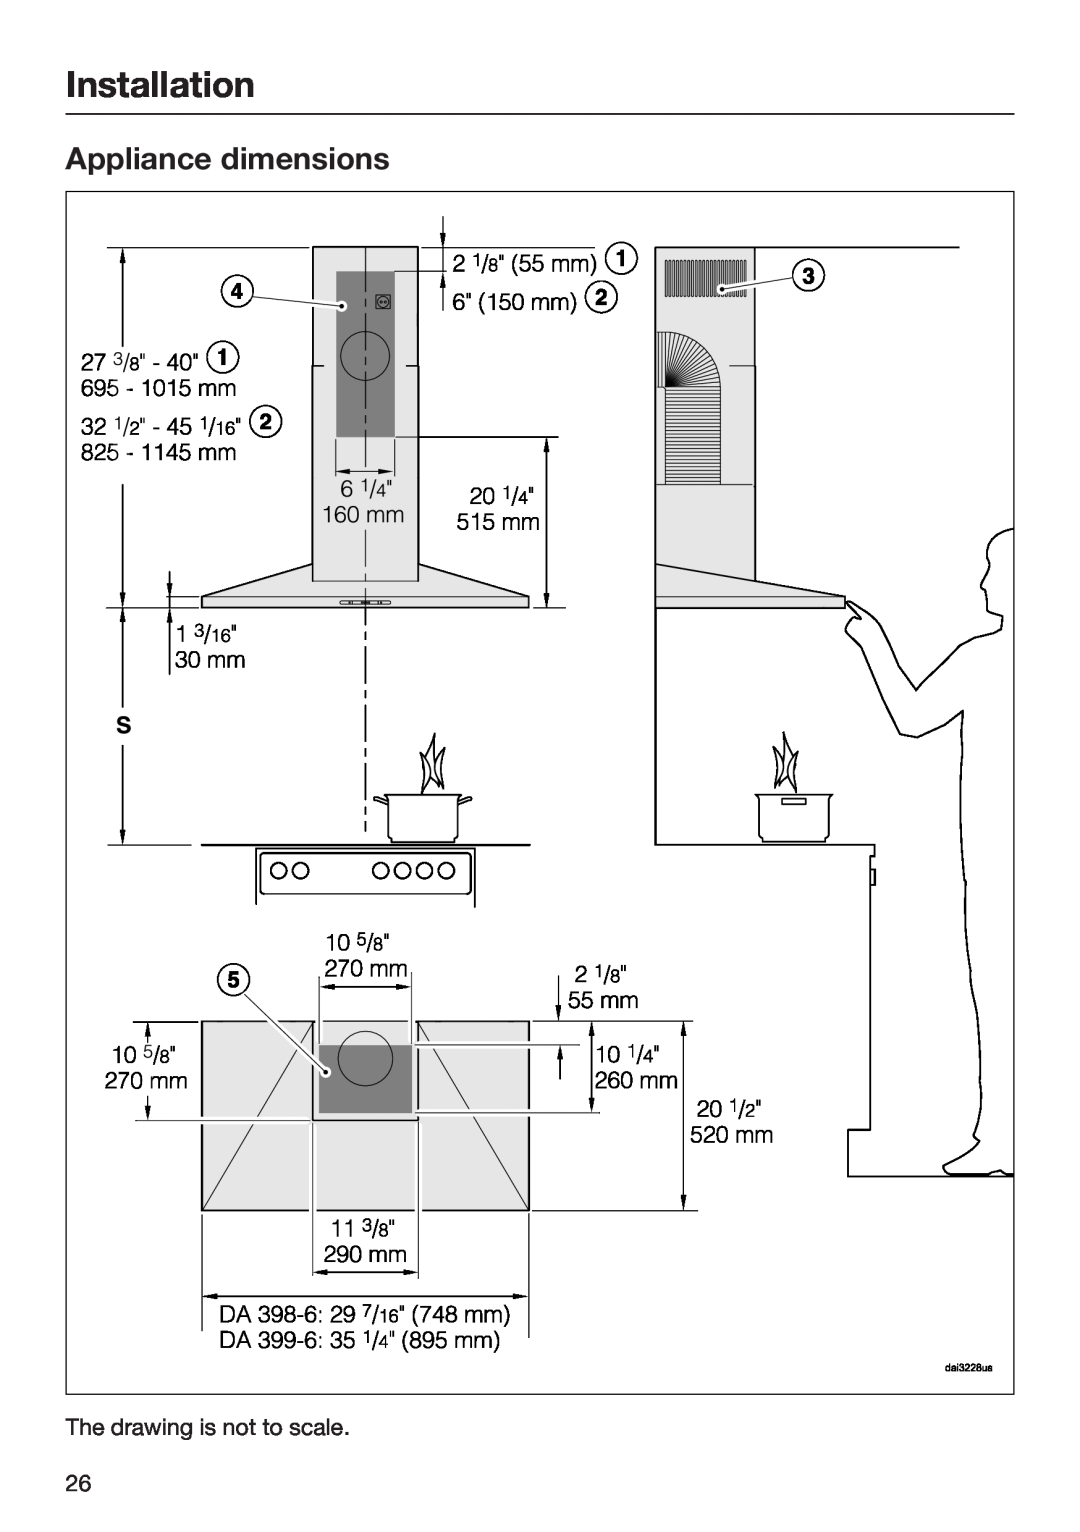 Miele 09 968 240 installation instructions Appliance dimensions, Installation, The drawing is not to scale 